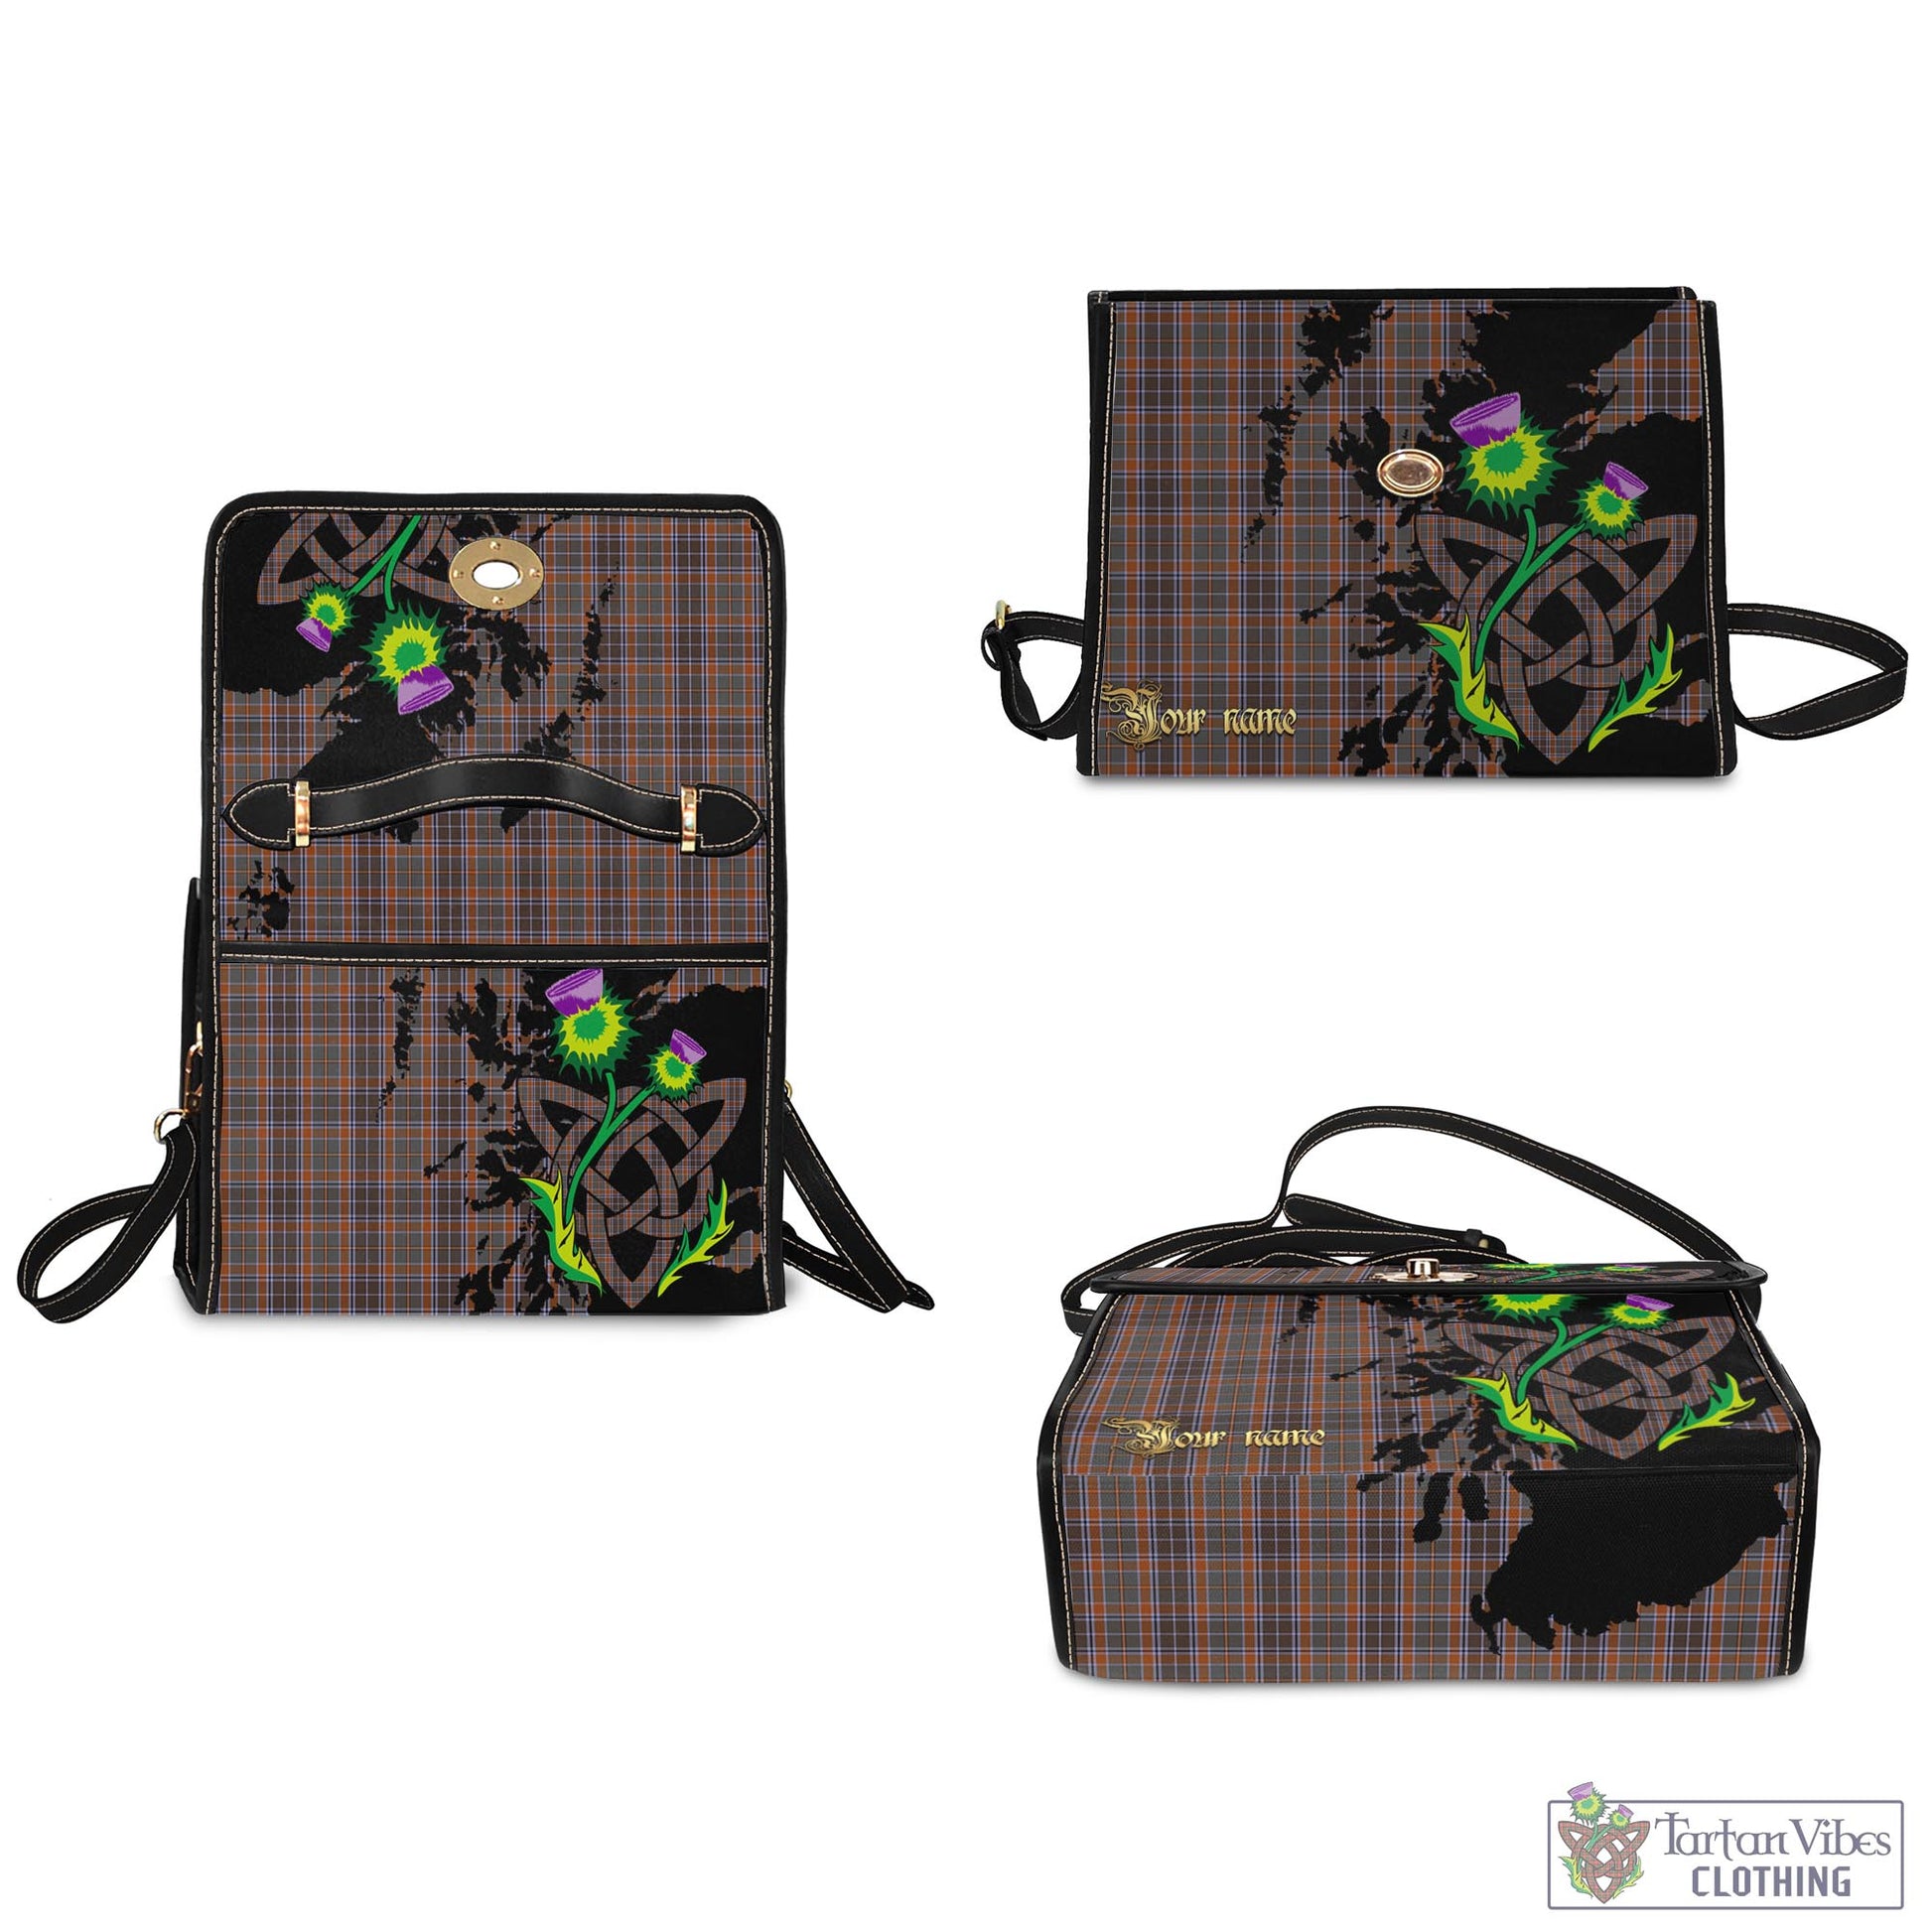 Tartan Vibes Clothing Leitrim County Ireland Tartan Waterproof Canvas Bag with Scotland Map and Thistle Celtic Accents